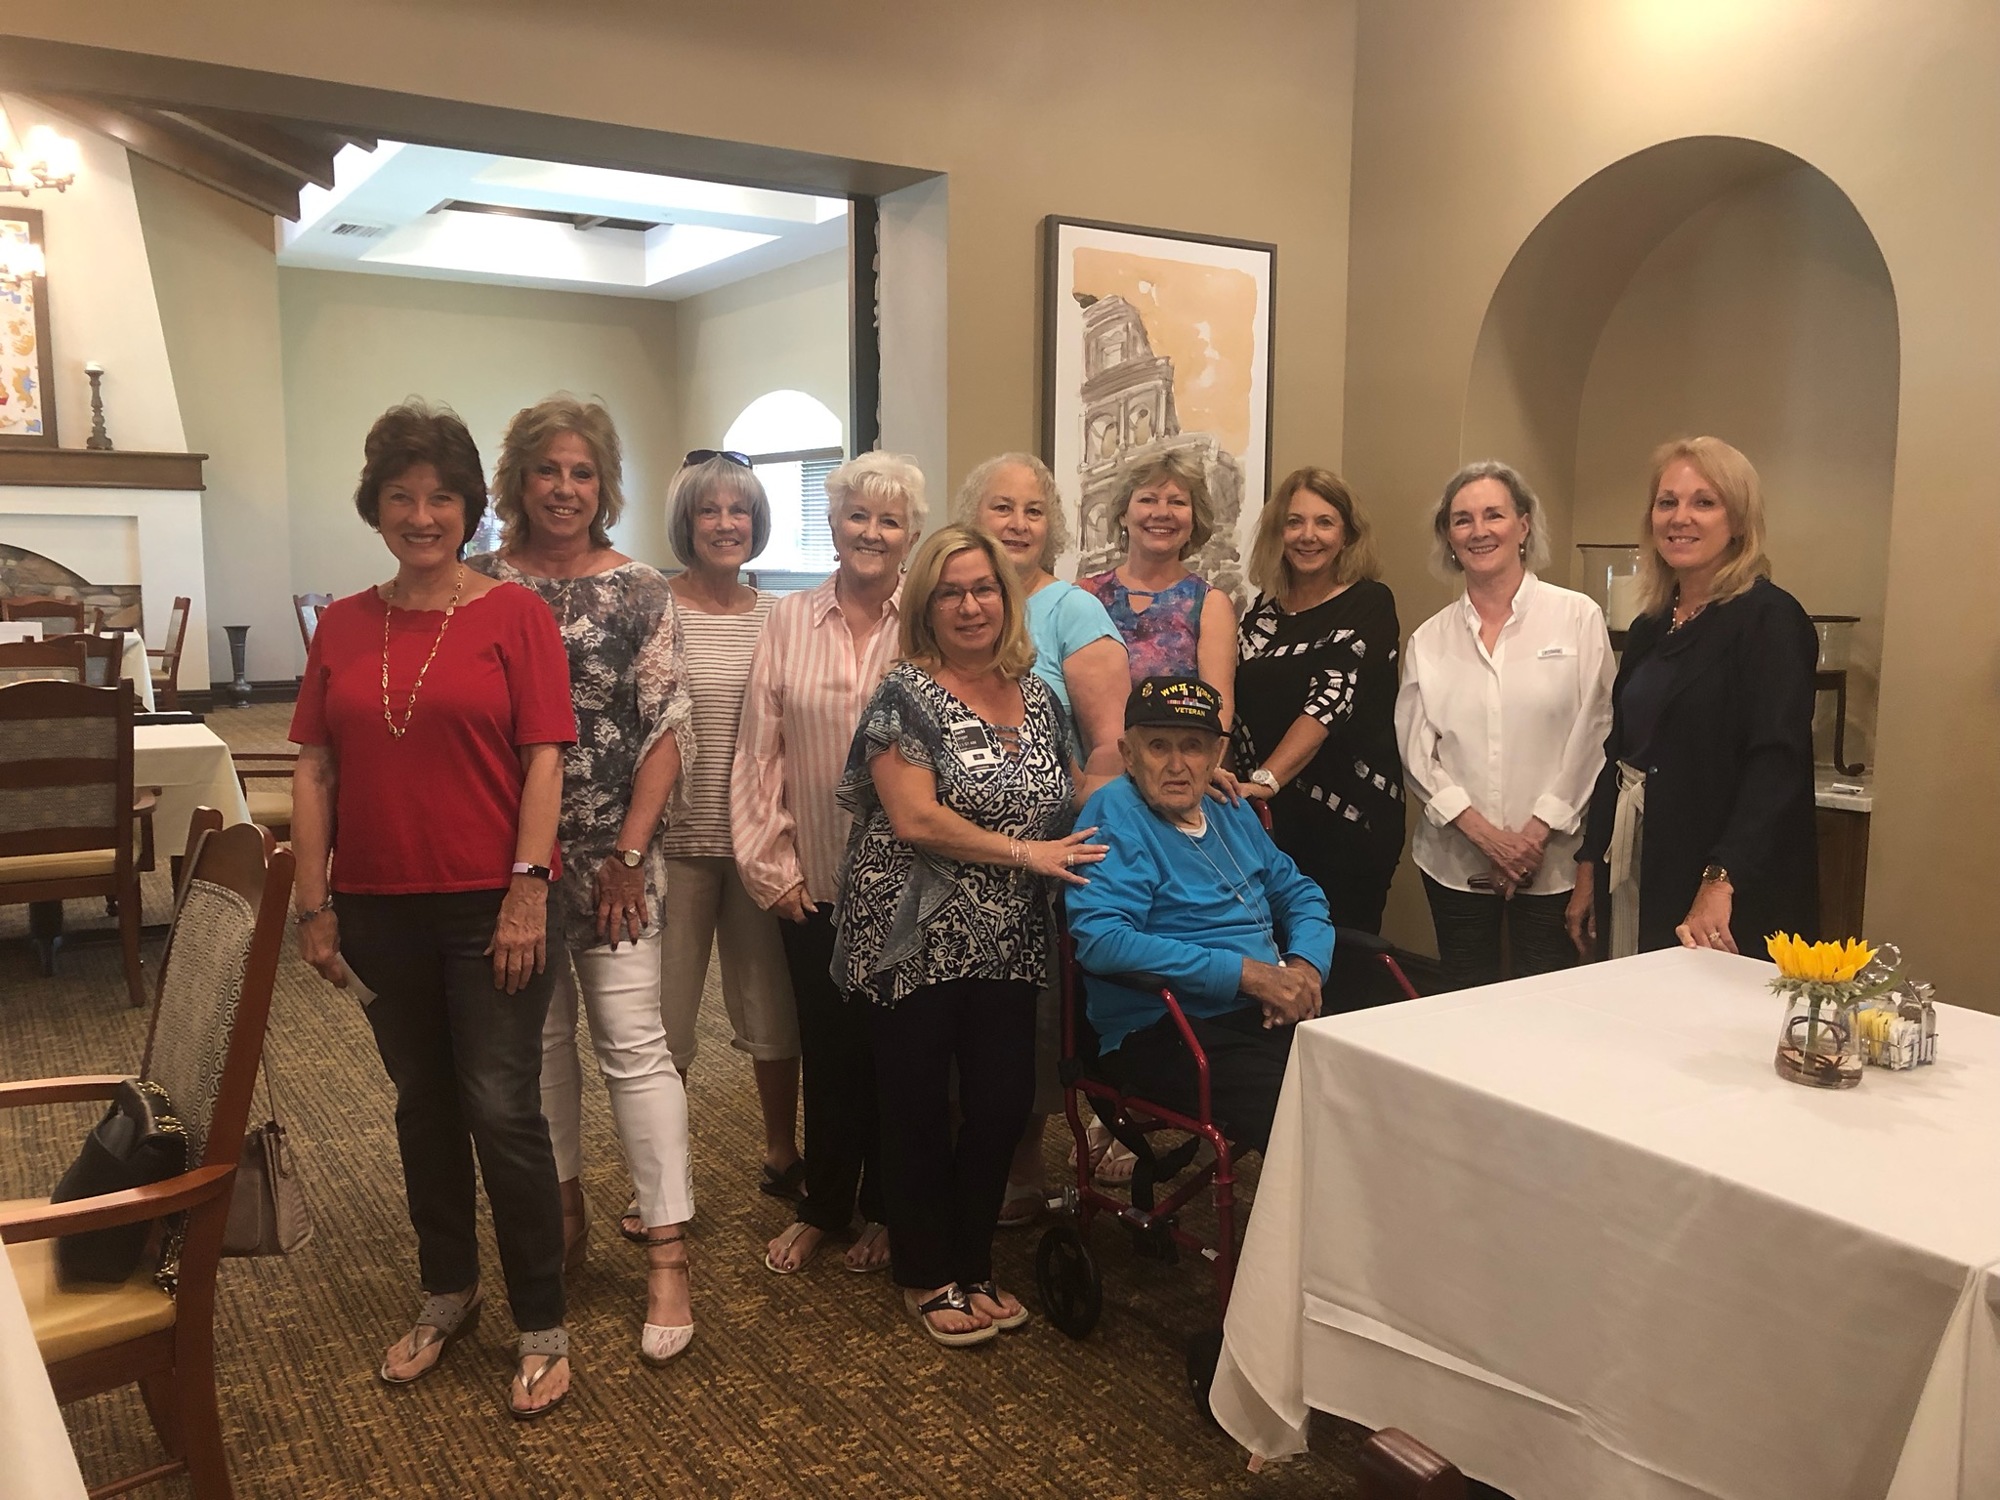 The Bookettes, a Grand Haven book club, visited veteran John Unger and presented him with a German chocolate birthday cake and card, which named him an honorary member of The Bookettes. Courtesy photo